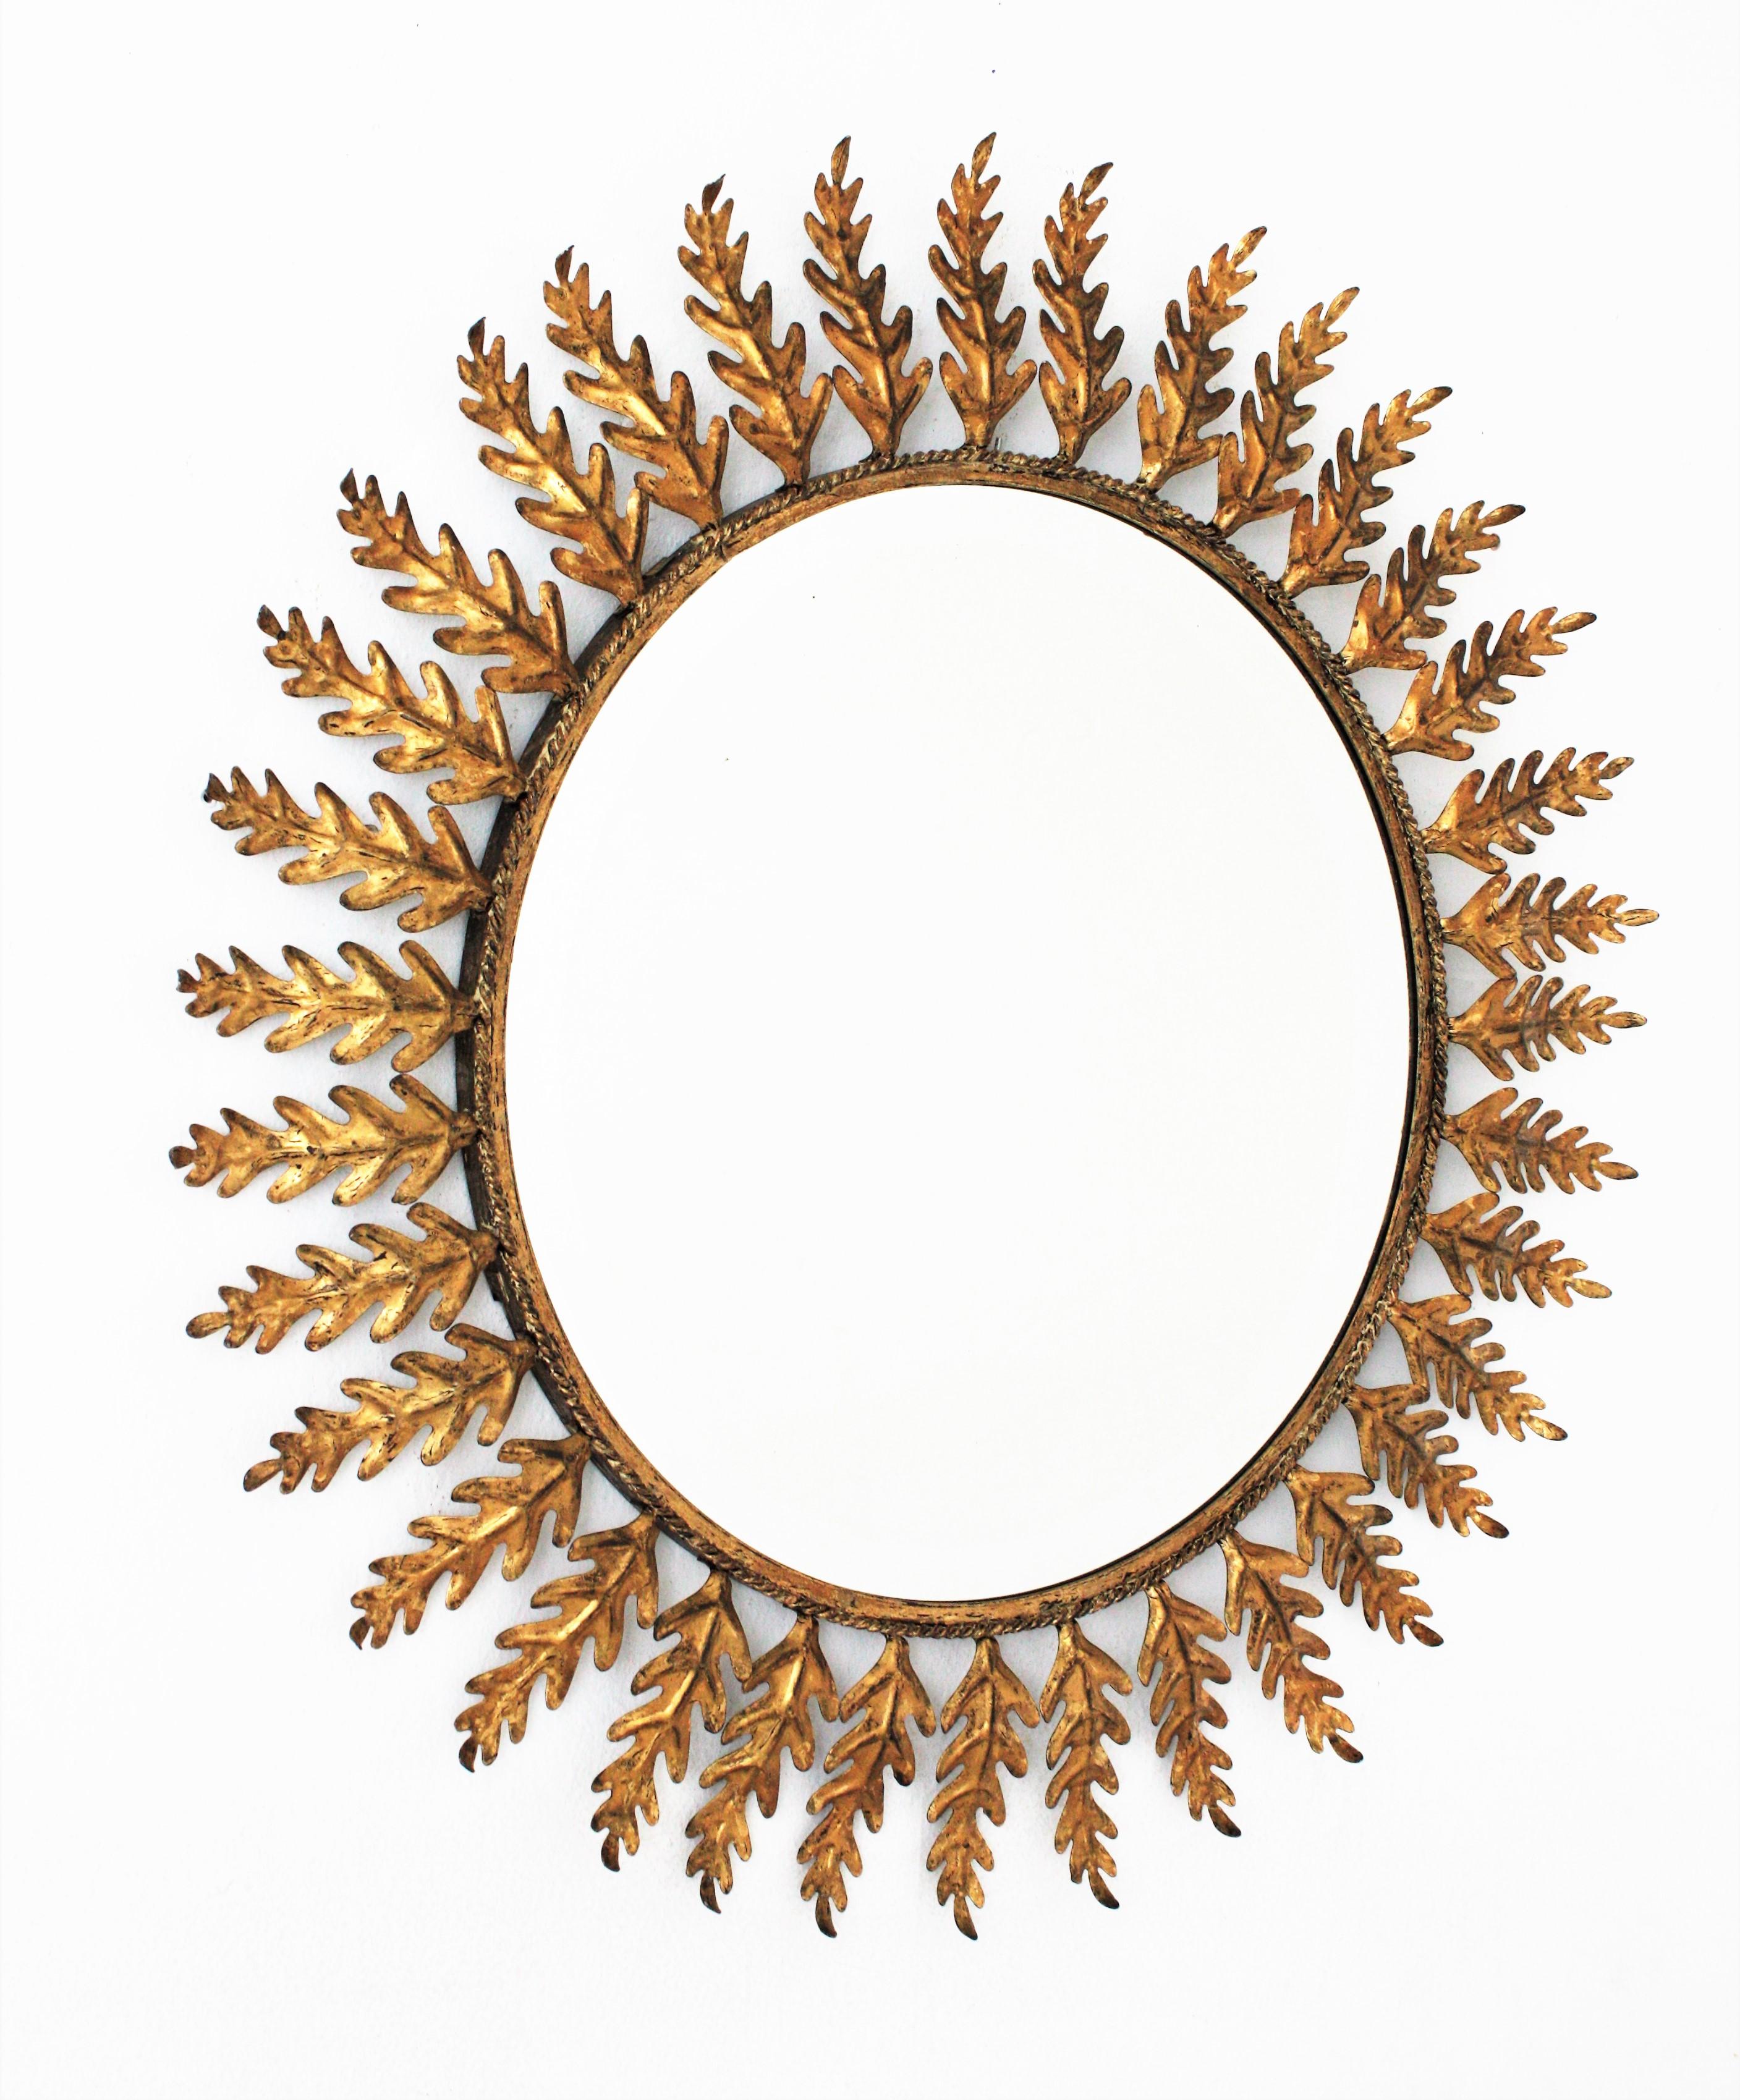 Outstanding gold leaf gilt iron sunburst mirror framed by oak leaves. Spain, 1960s.
This round sunburst mirror has a lefed frame comprised by oak leaves handcrafted in iron and gilded with gold leaf.
It has a beautiful design, a large mirror surface